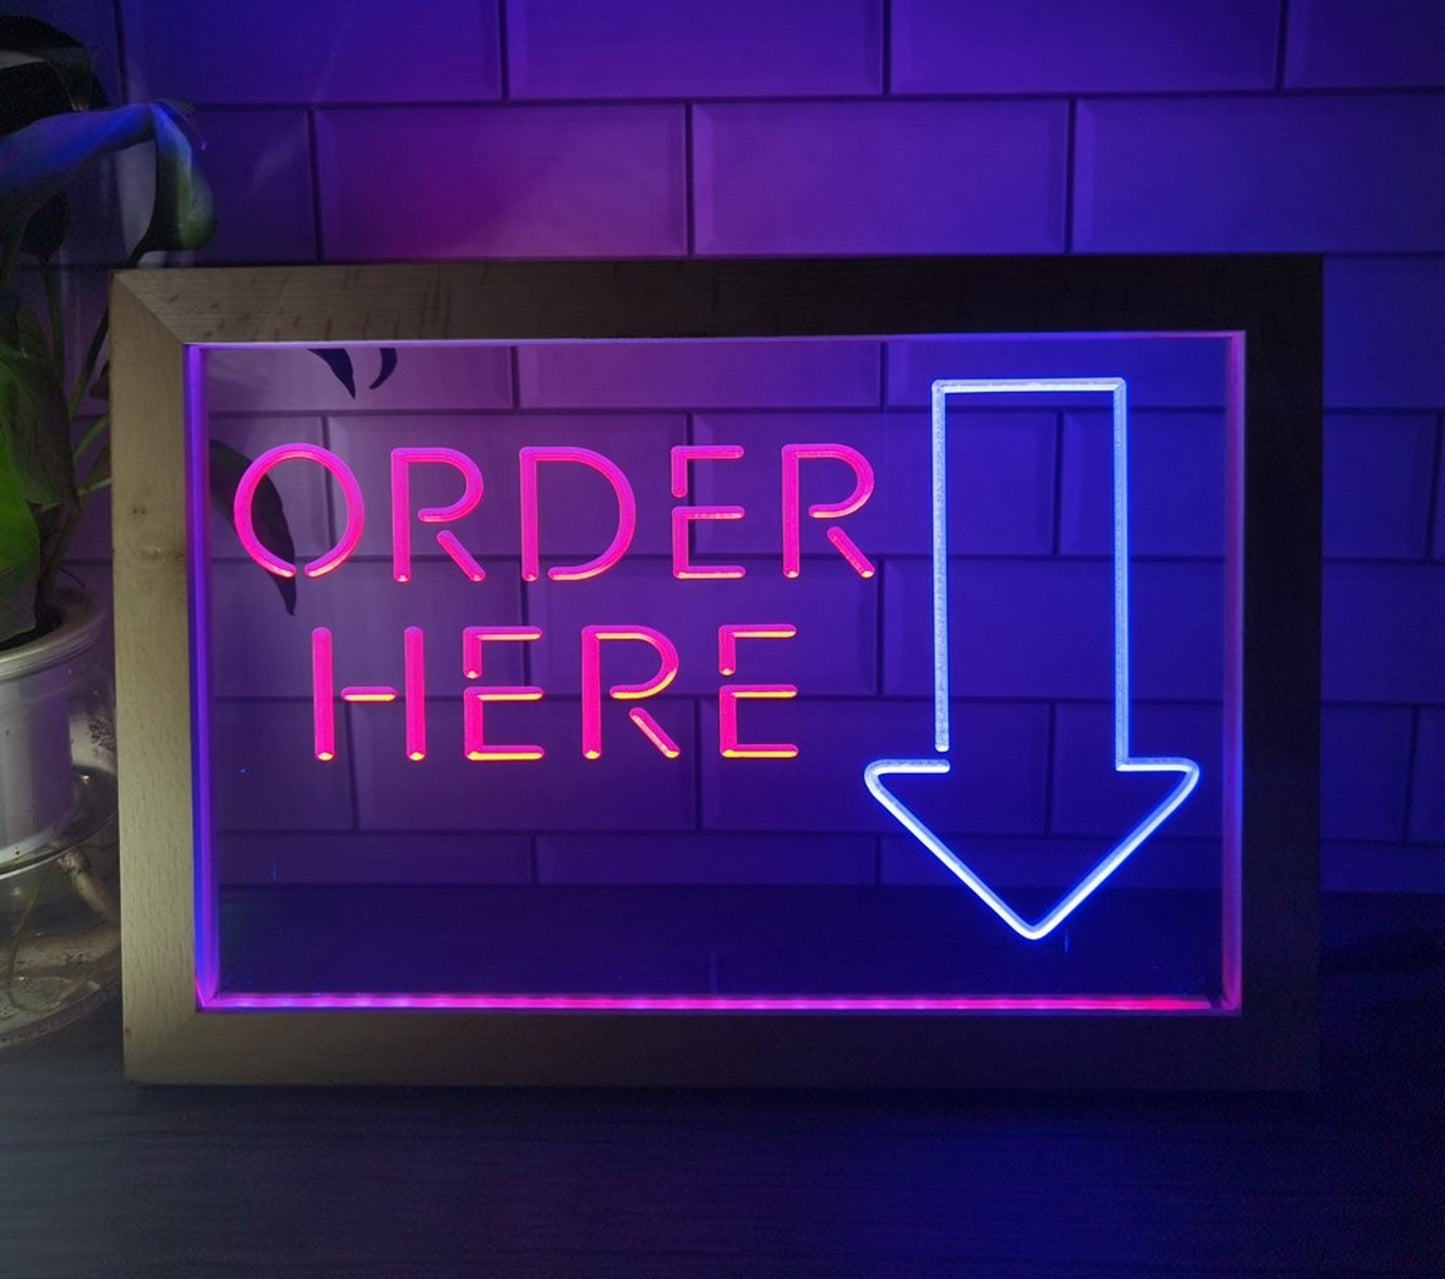 Neon Sign Framed Dual Color Order Here Store Shop Wall Desktop Decor Free Shipping